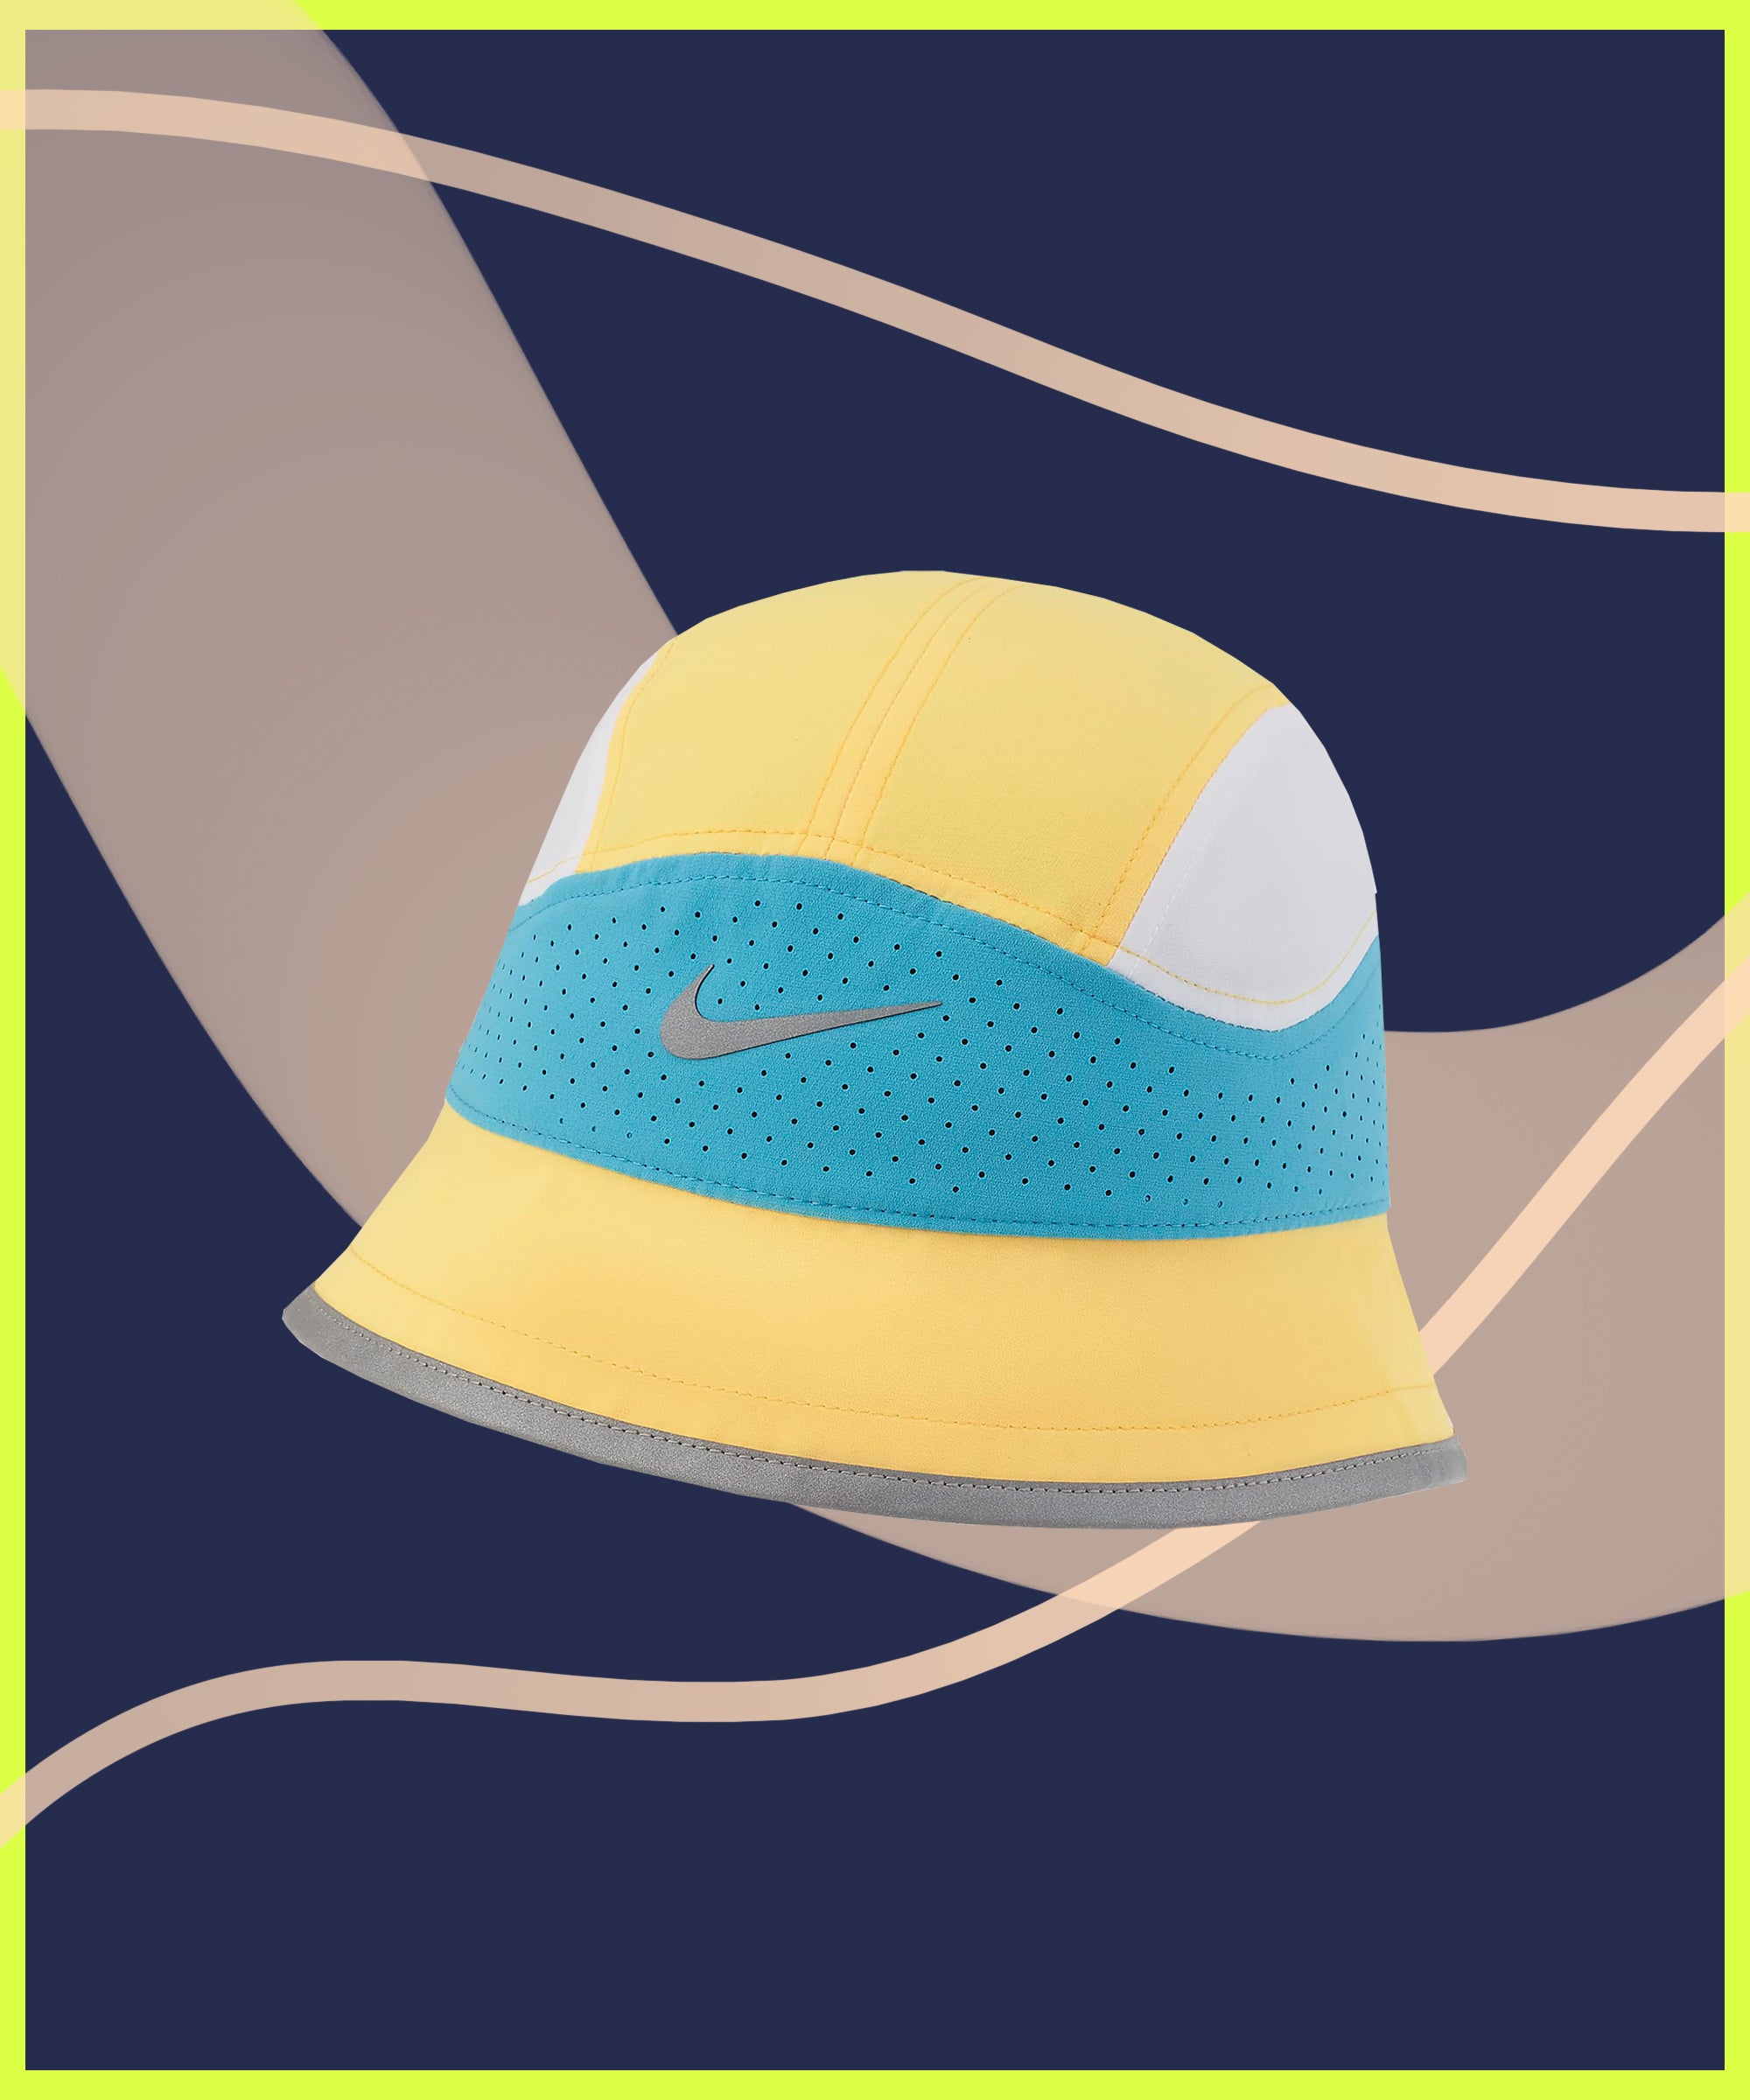 Bucket Hats Are Trendy — But Should You Run In Them?